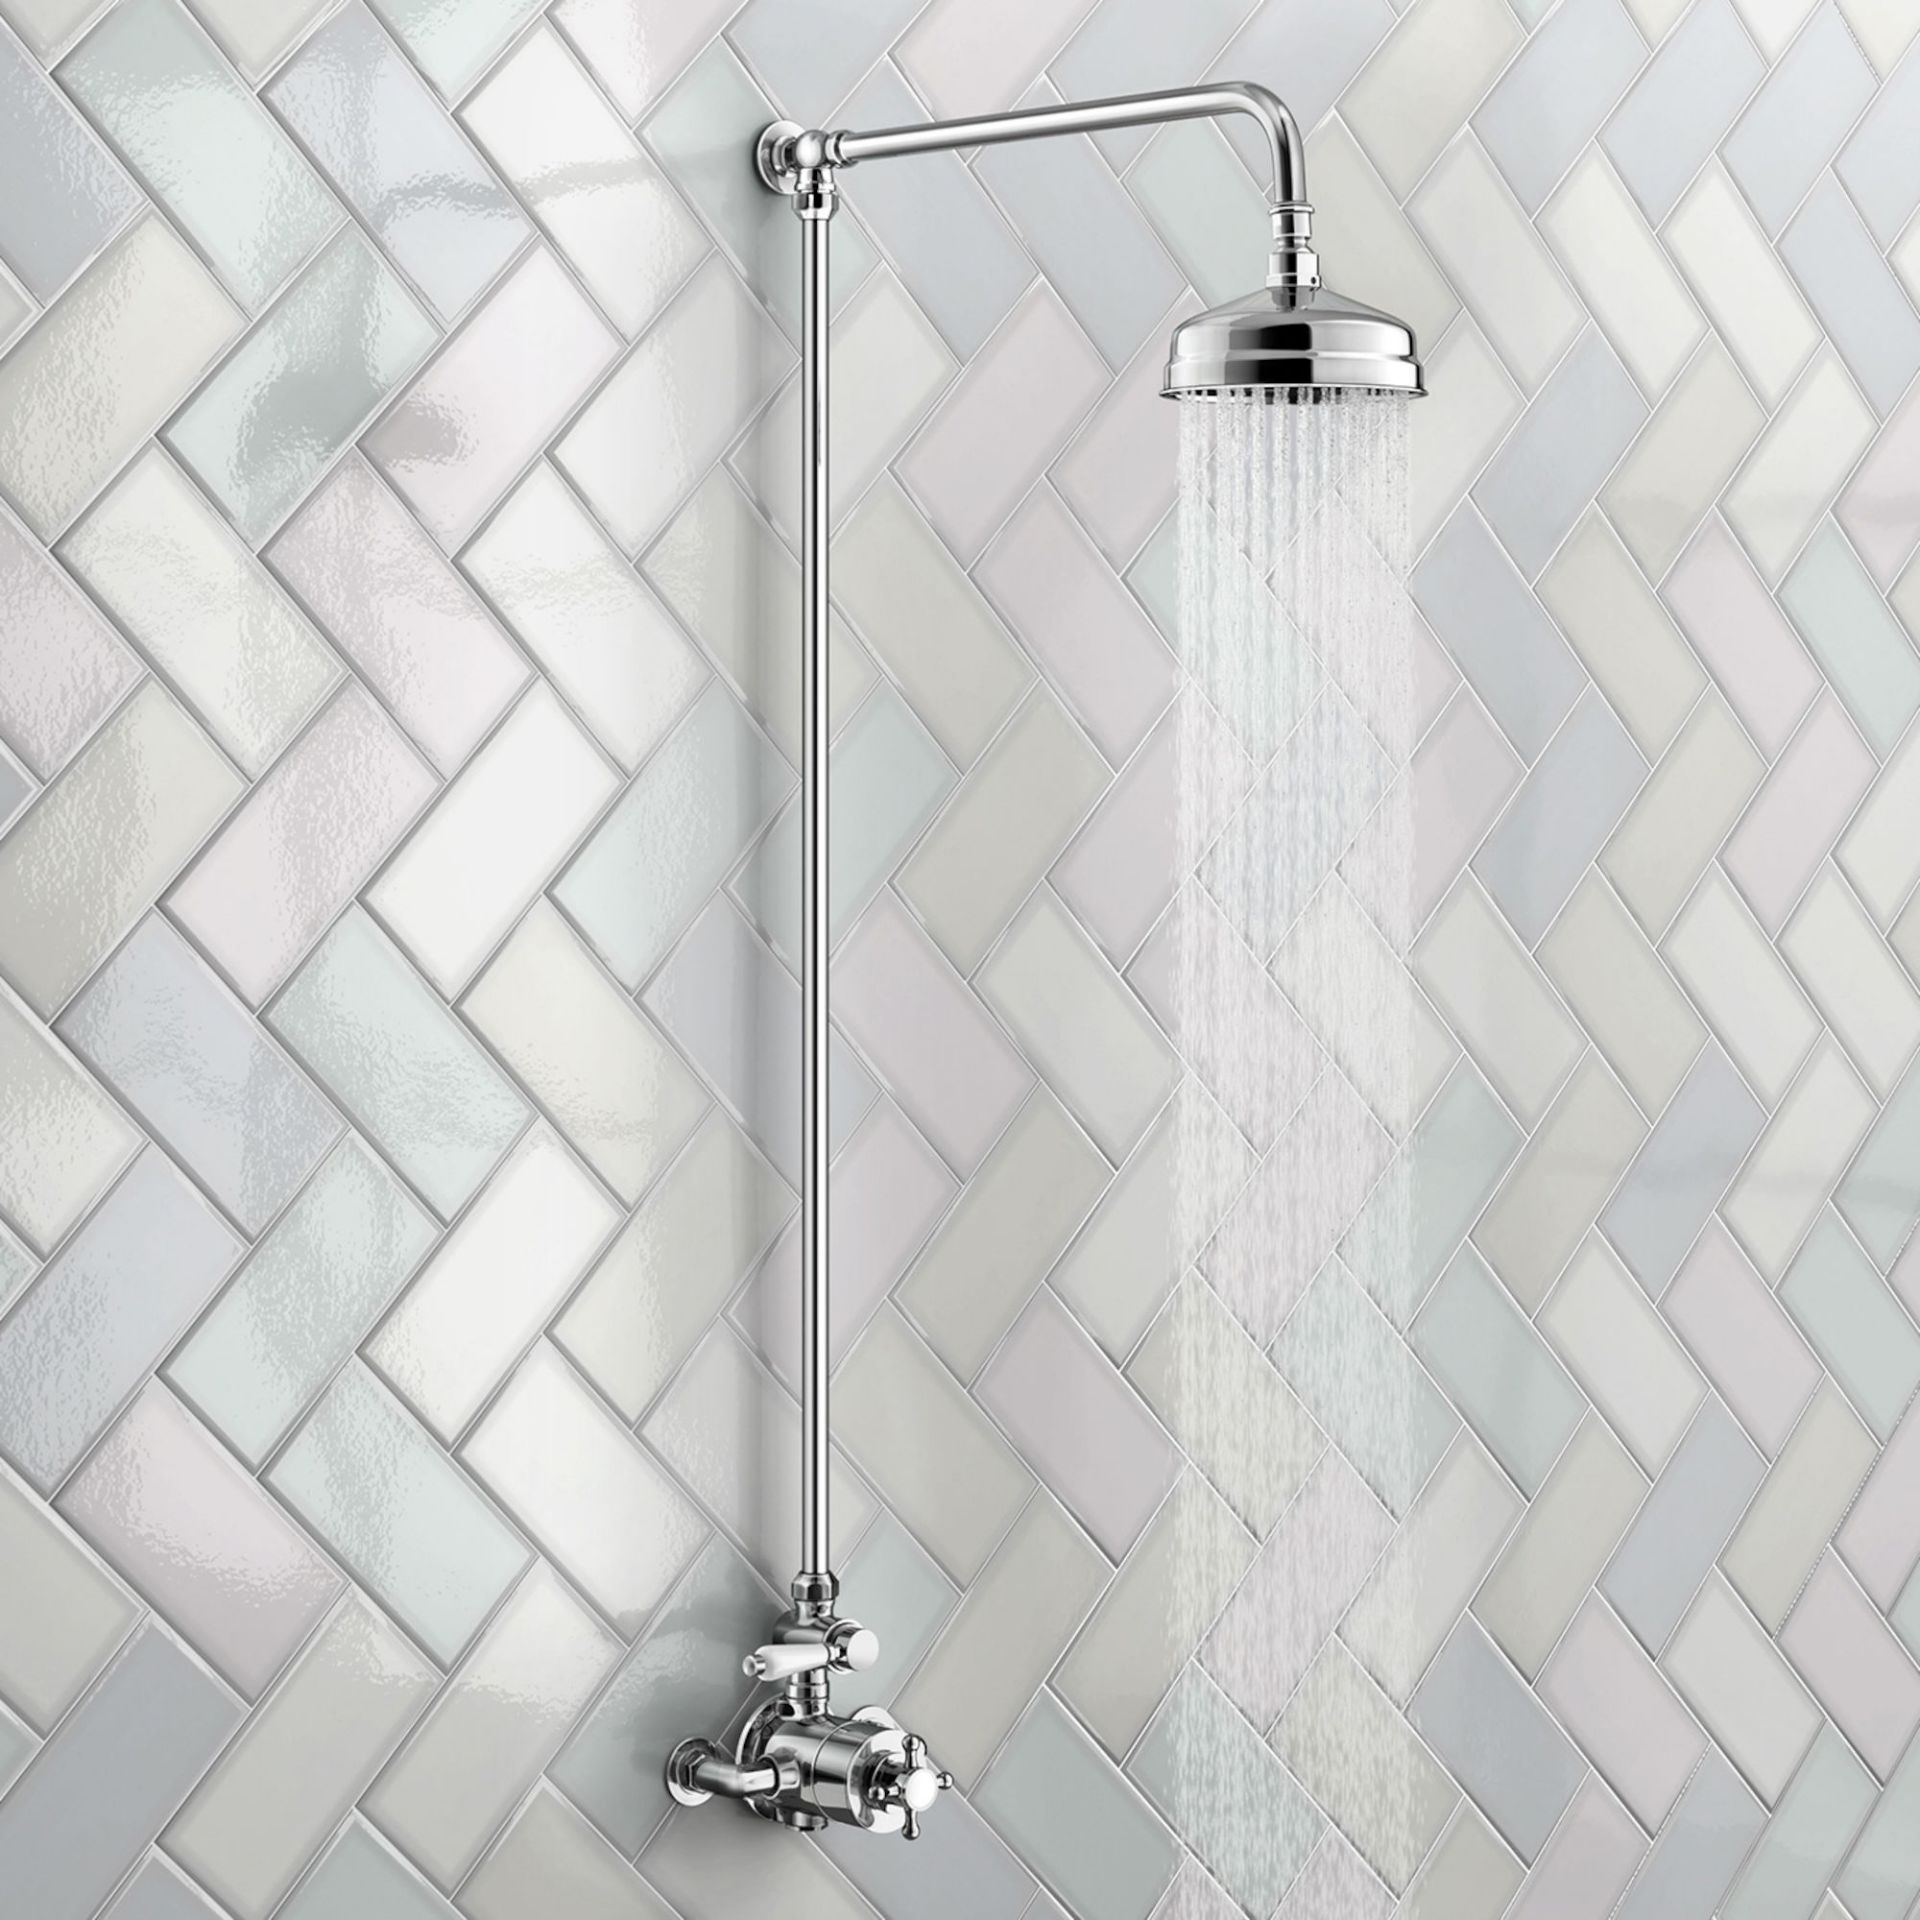 (YC63) Traditional Exposed Thermostatic Shower Kit & Medium Head. Traditional exposed valve